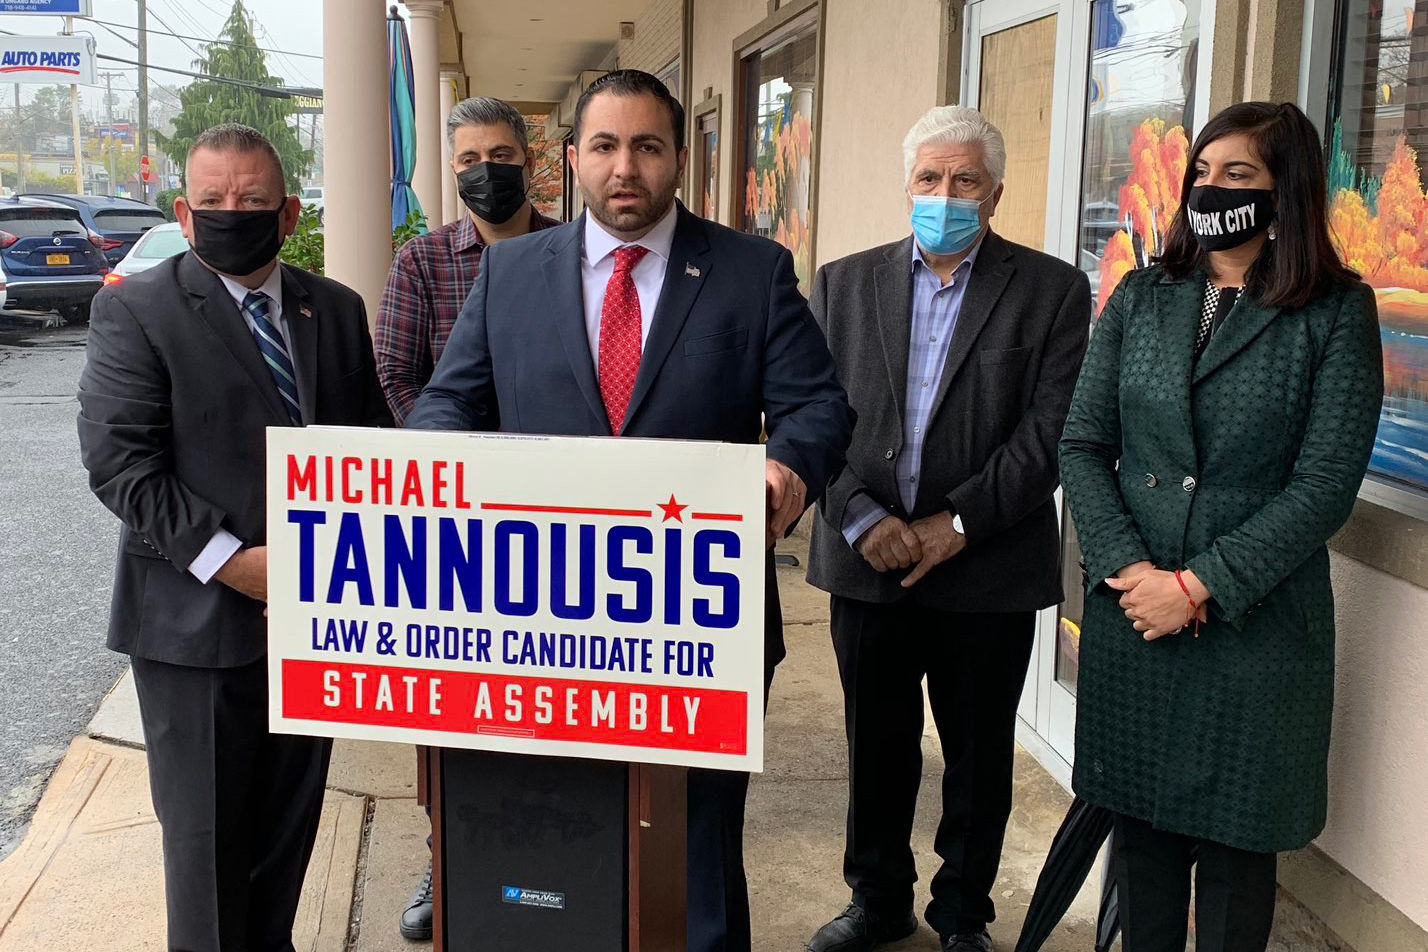 Republican Michael Tannousis will represent part of Staten Island and South Brooklyn in the State Assembly, replacing Malliotakis.